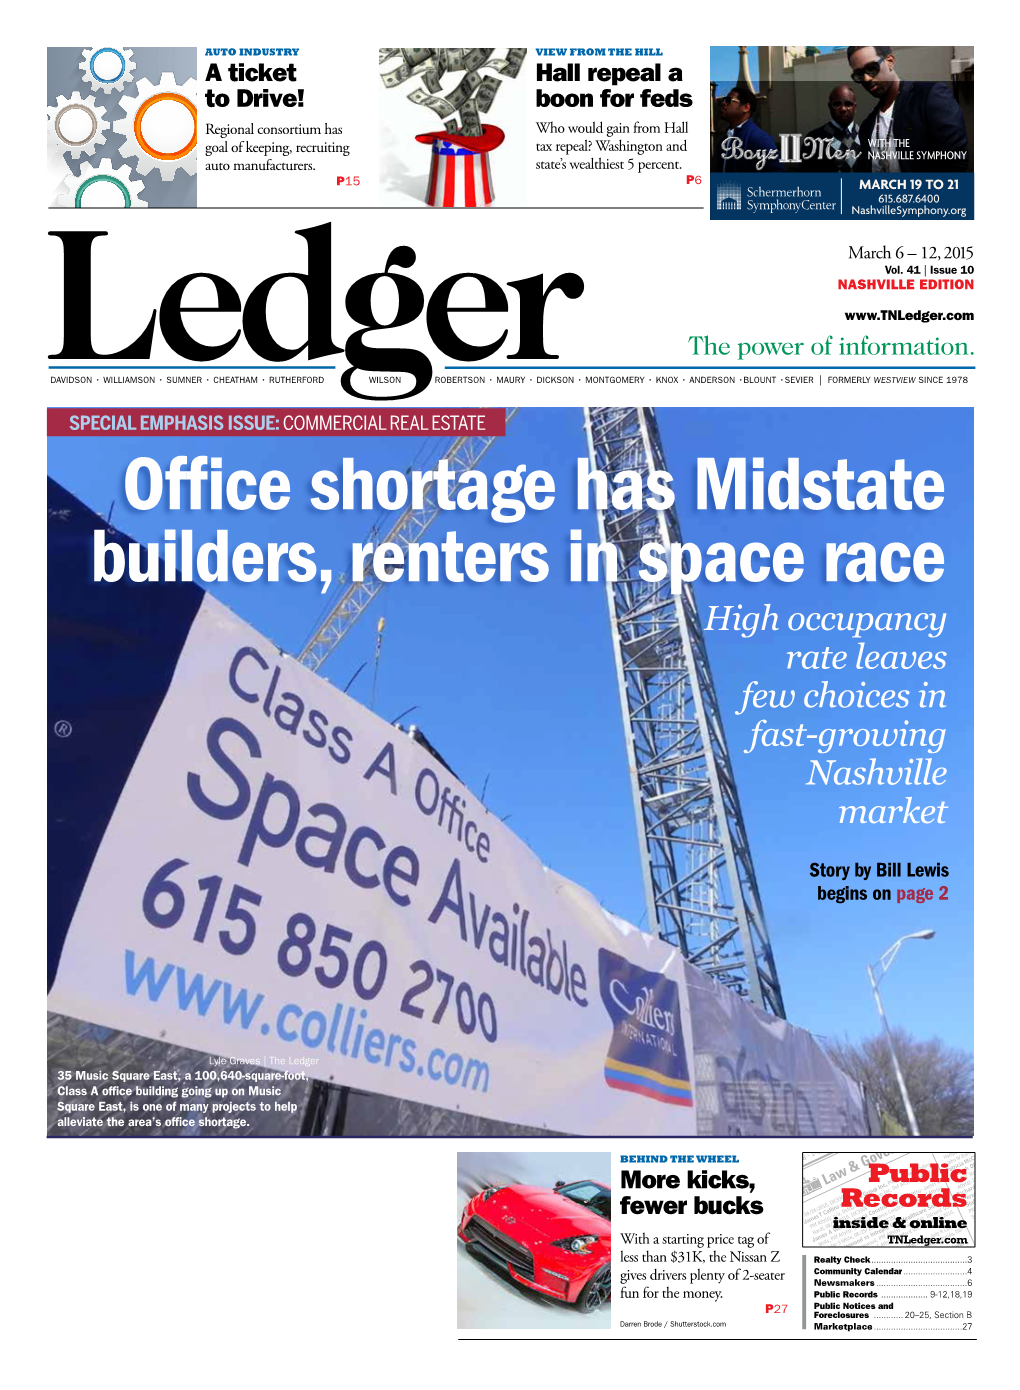 Office Shortage Has Midstate Builders, Renters in Space Race High Occupancy Rate Leaves Few Choices in Fast-Growing Nashville Market